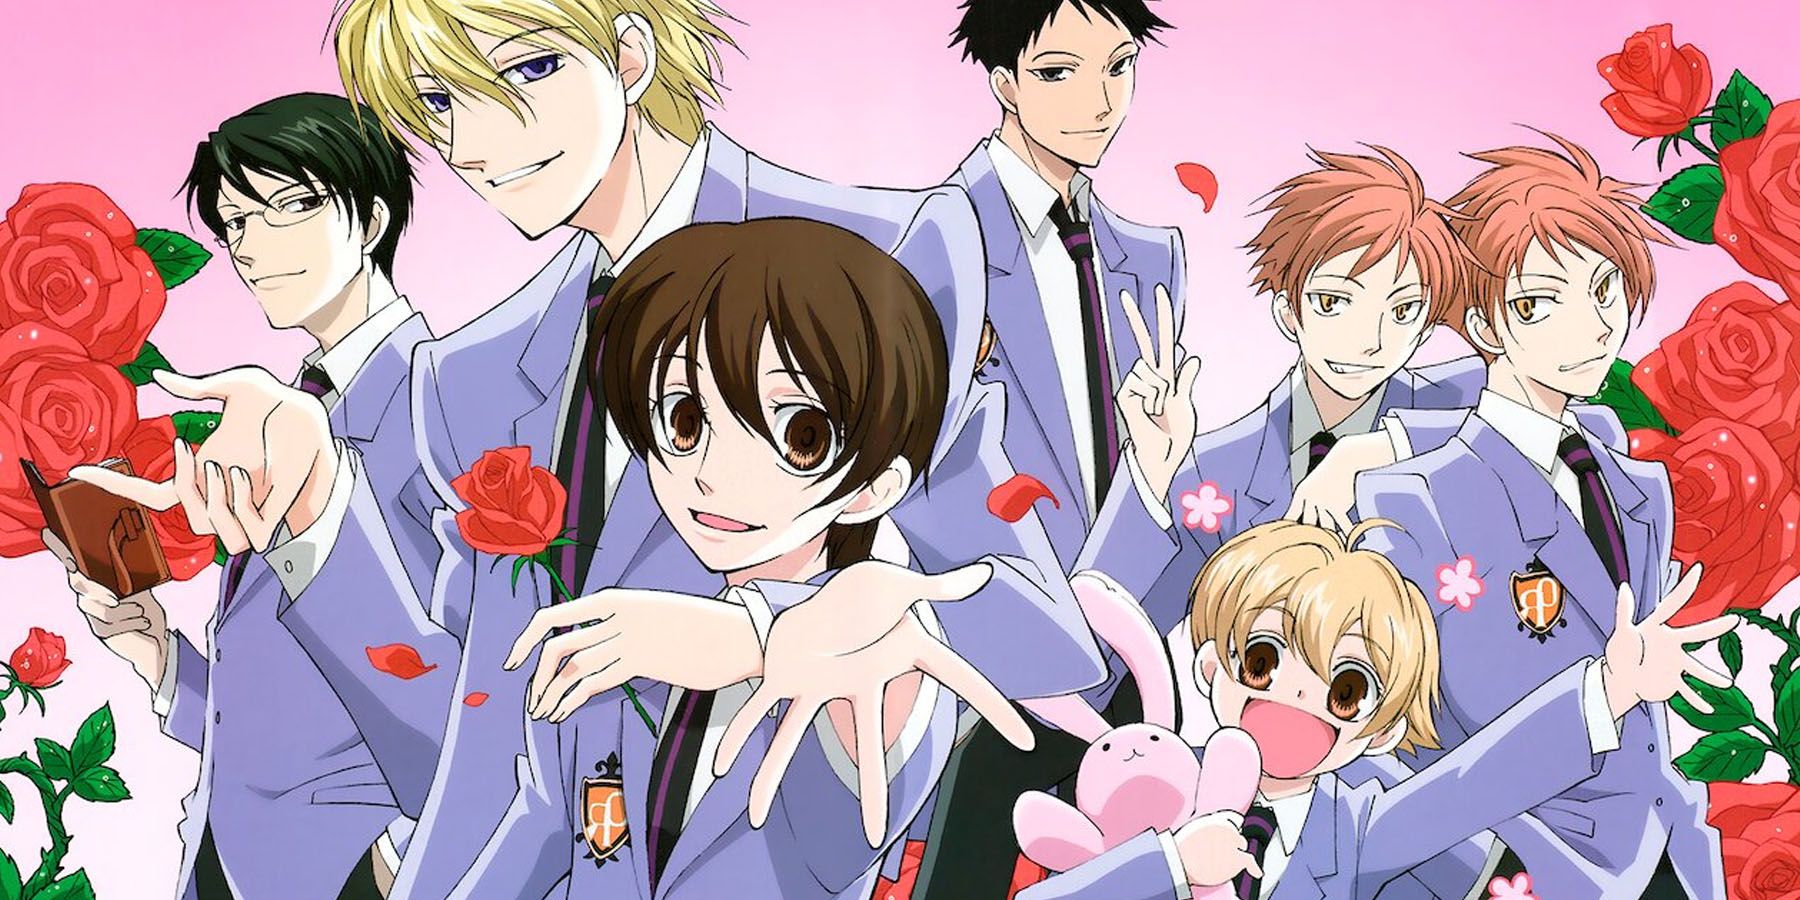 The Main Cast of Ouran High School Host Club